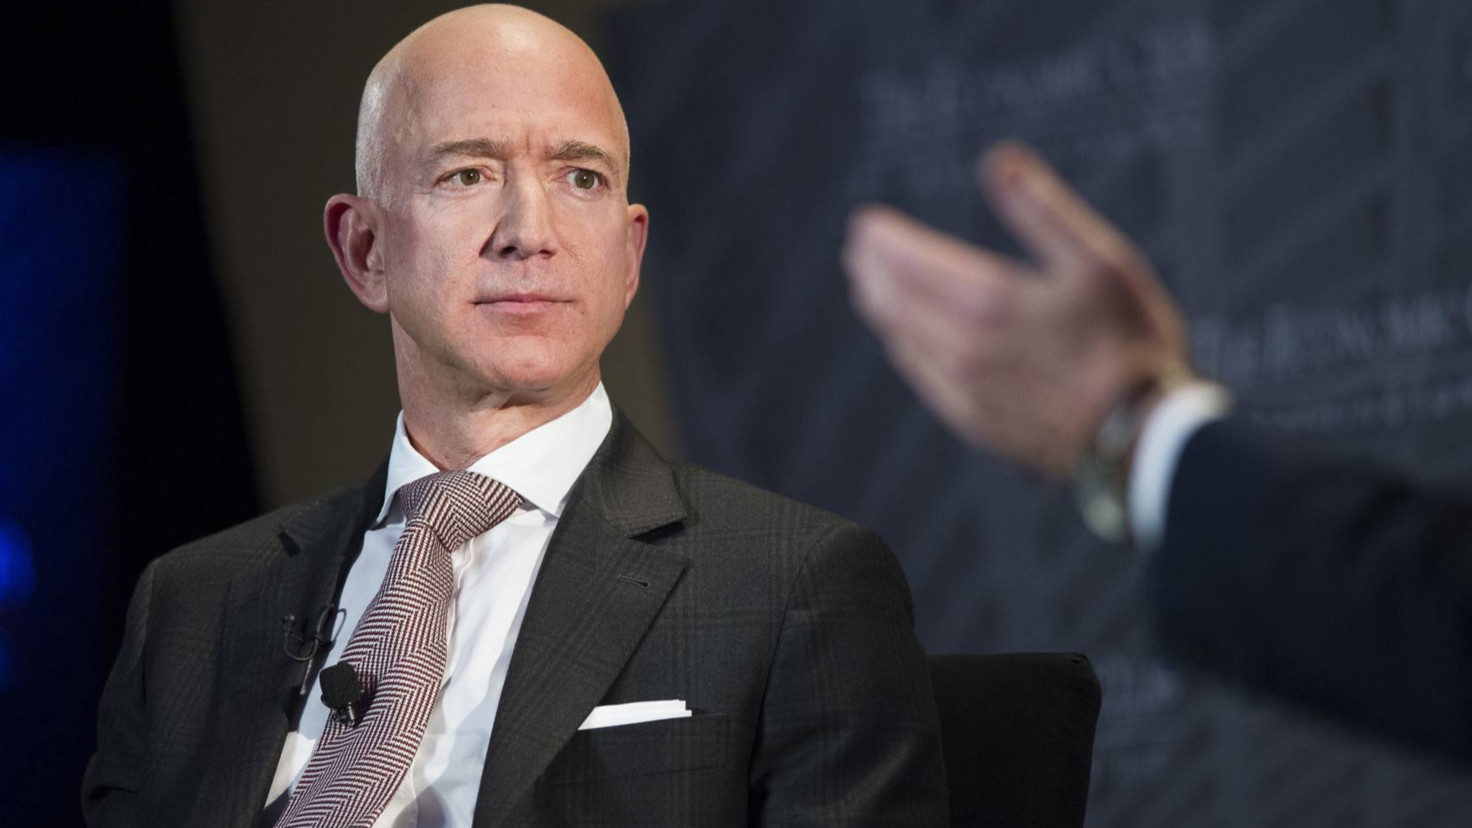 Jeff Bezos loses his crown as world's richest person as Amazon stock plunges